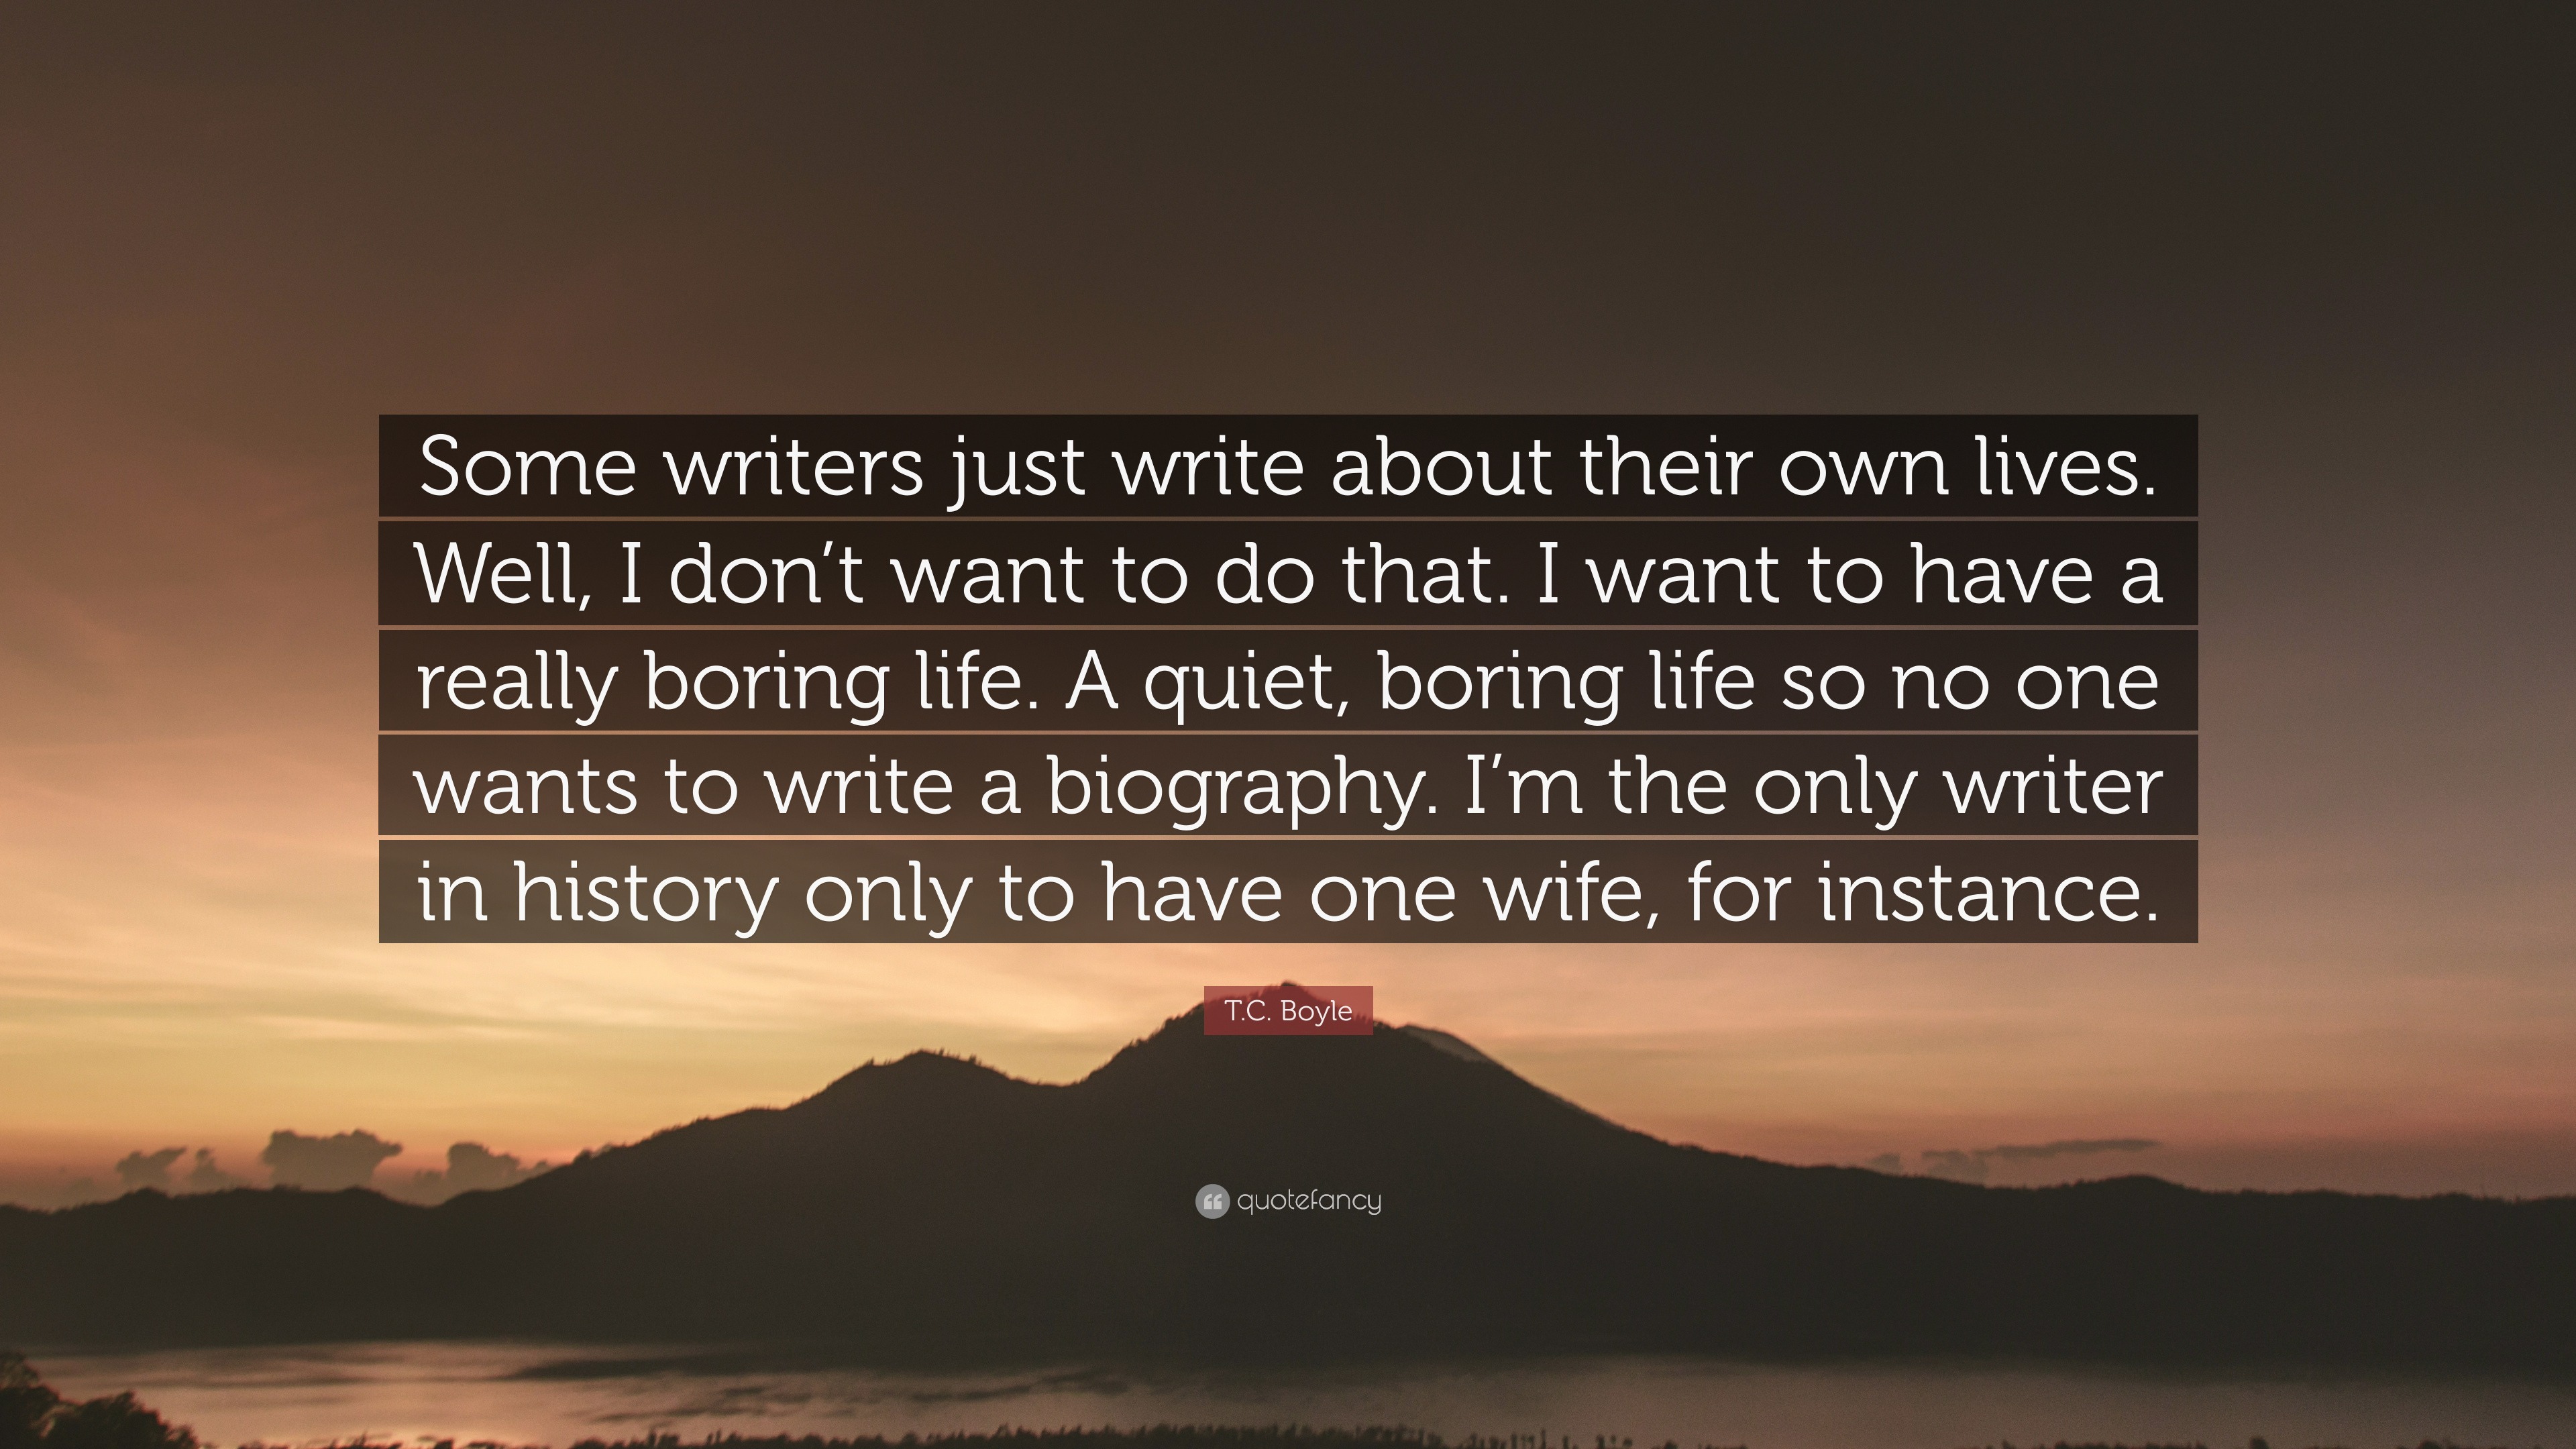 https://quotefancy.com/media/wallpaper/3840x2160/3102780-T-C-Boyle-Quote-Some-writers-just-write-about-their-own-lives-Well.jpg